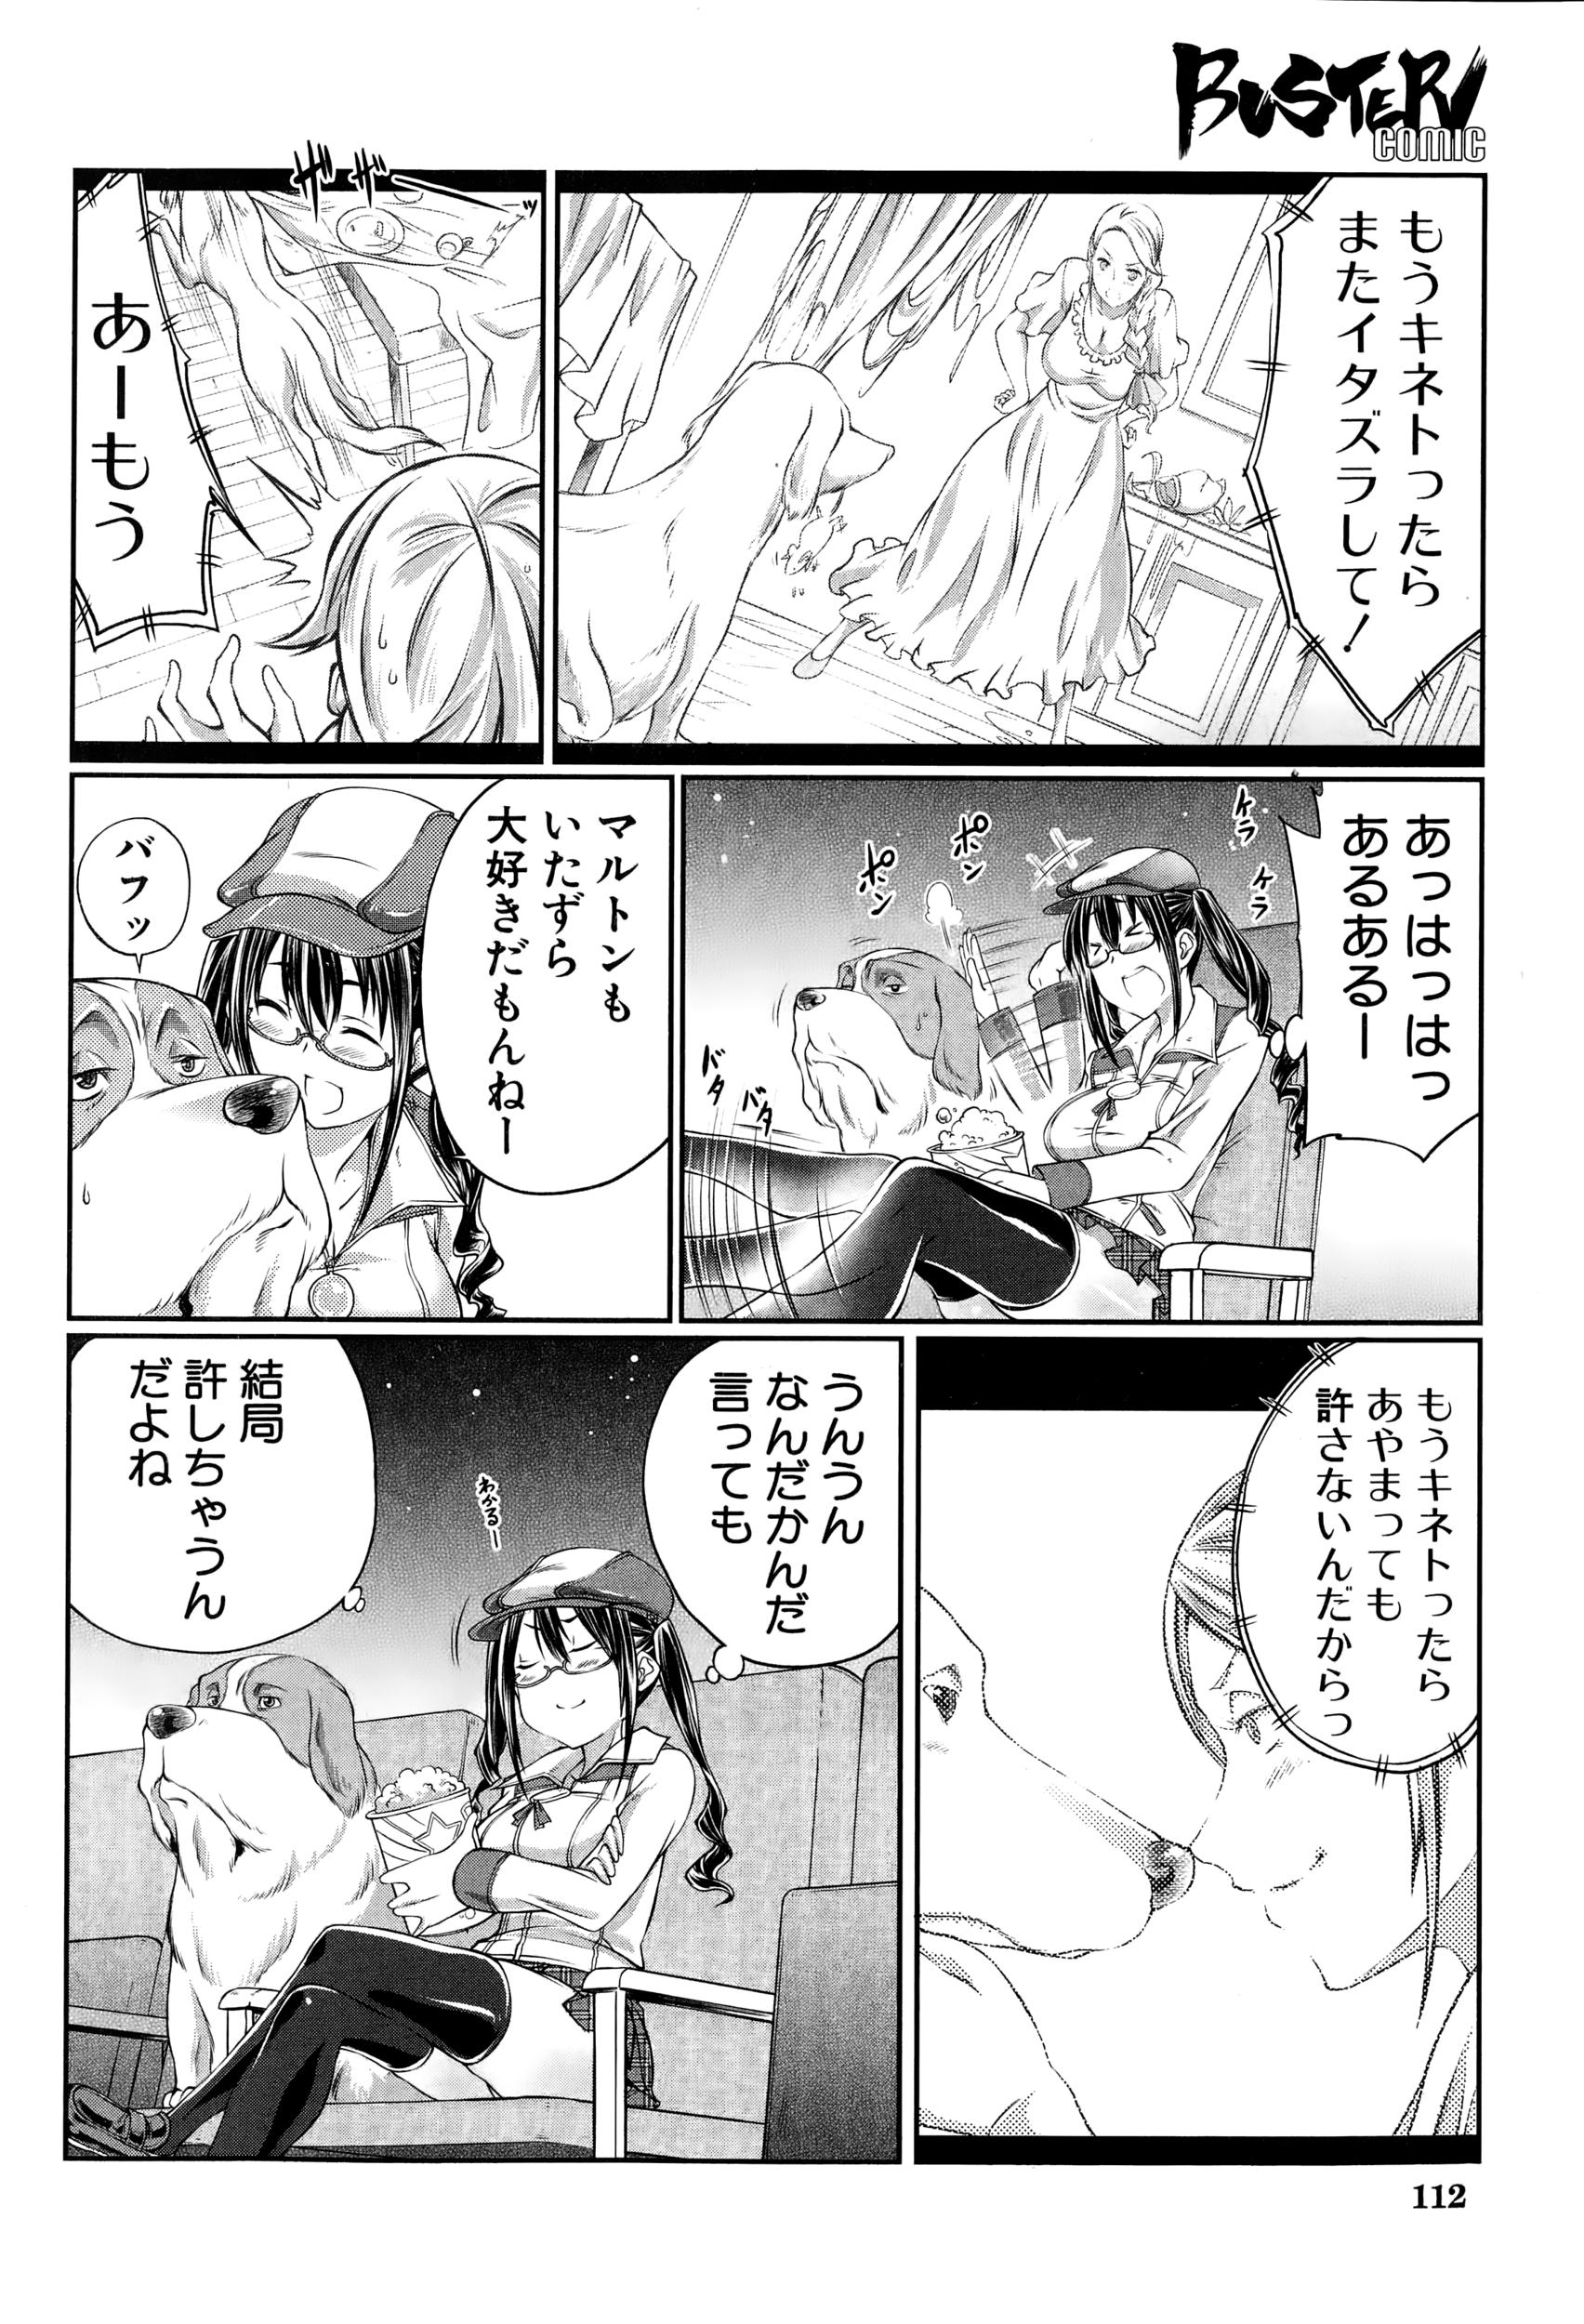 BUSTER COMIC 2015-01 111